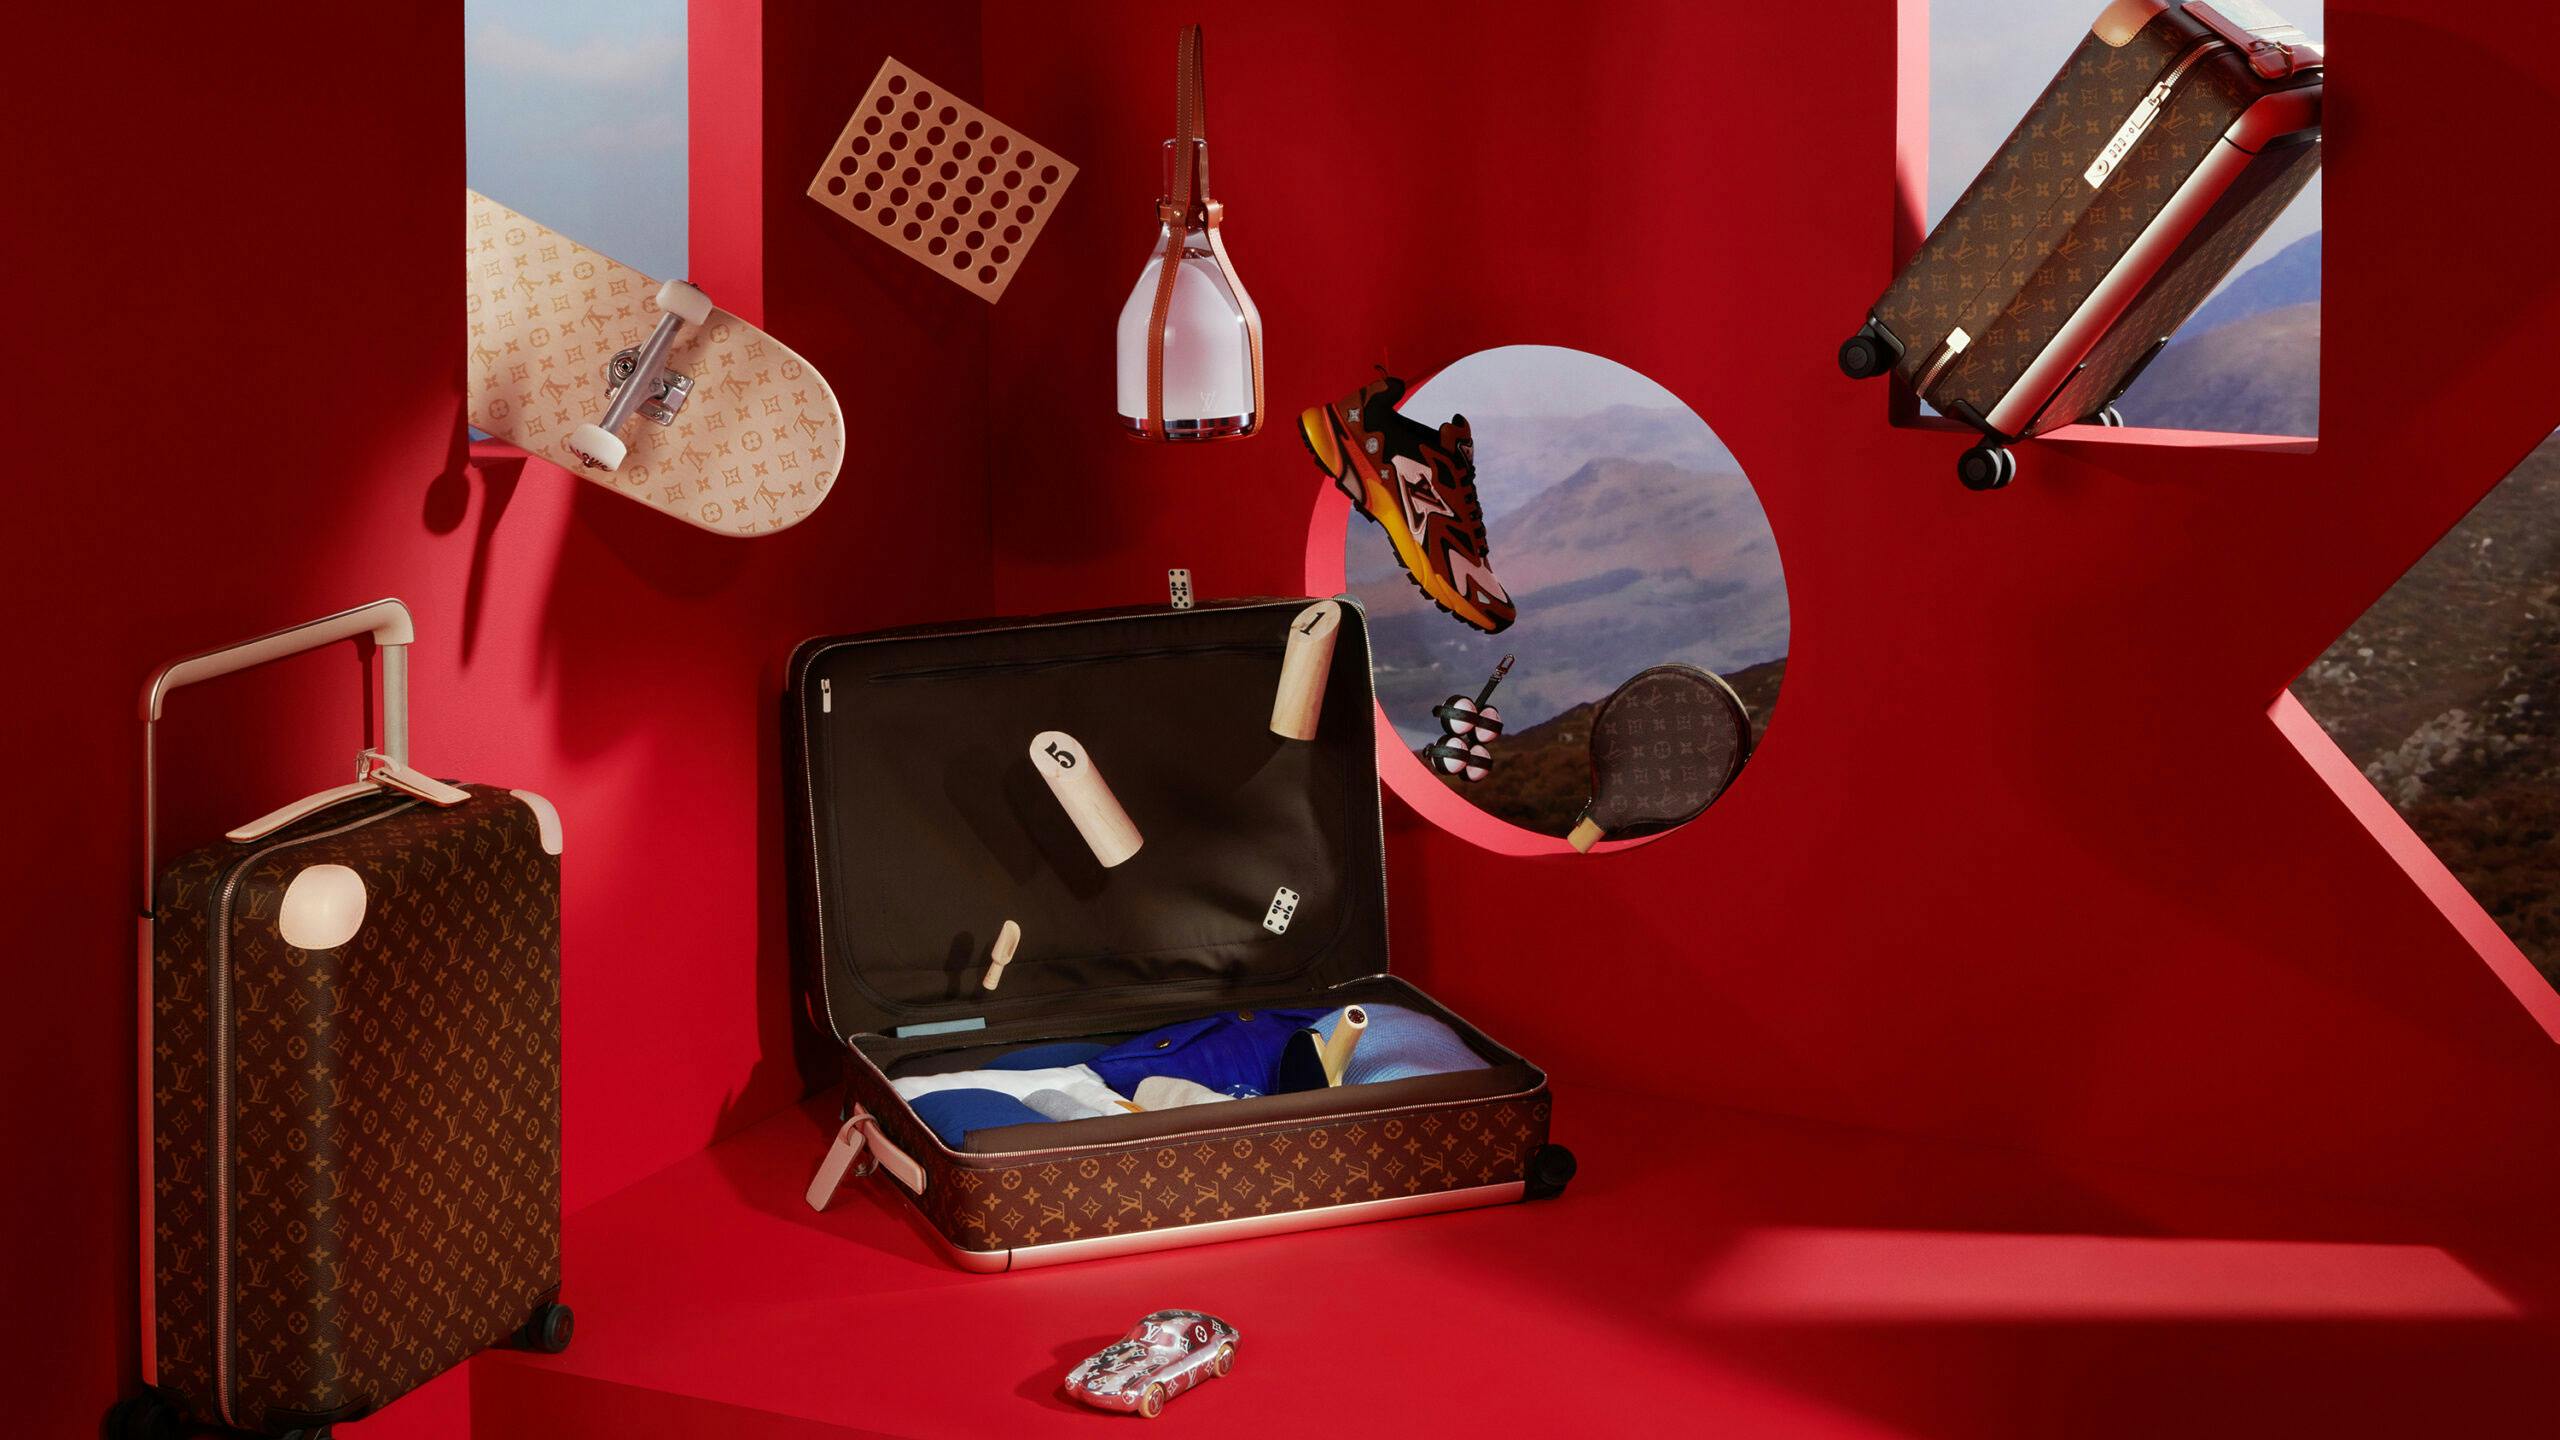 Louis Vuitton's Super Popular Rolling Luggage Just Got a Whole New Look -  PurseBlog